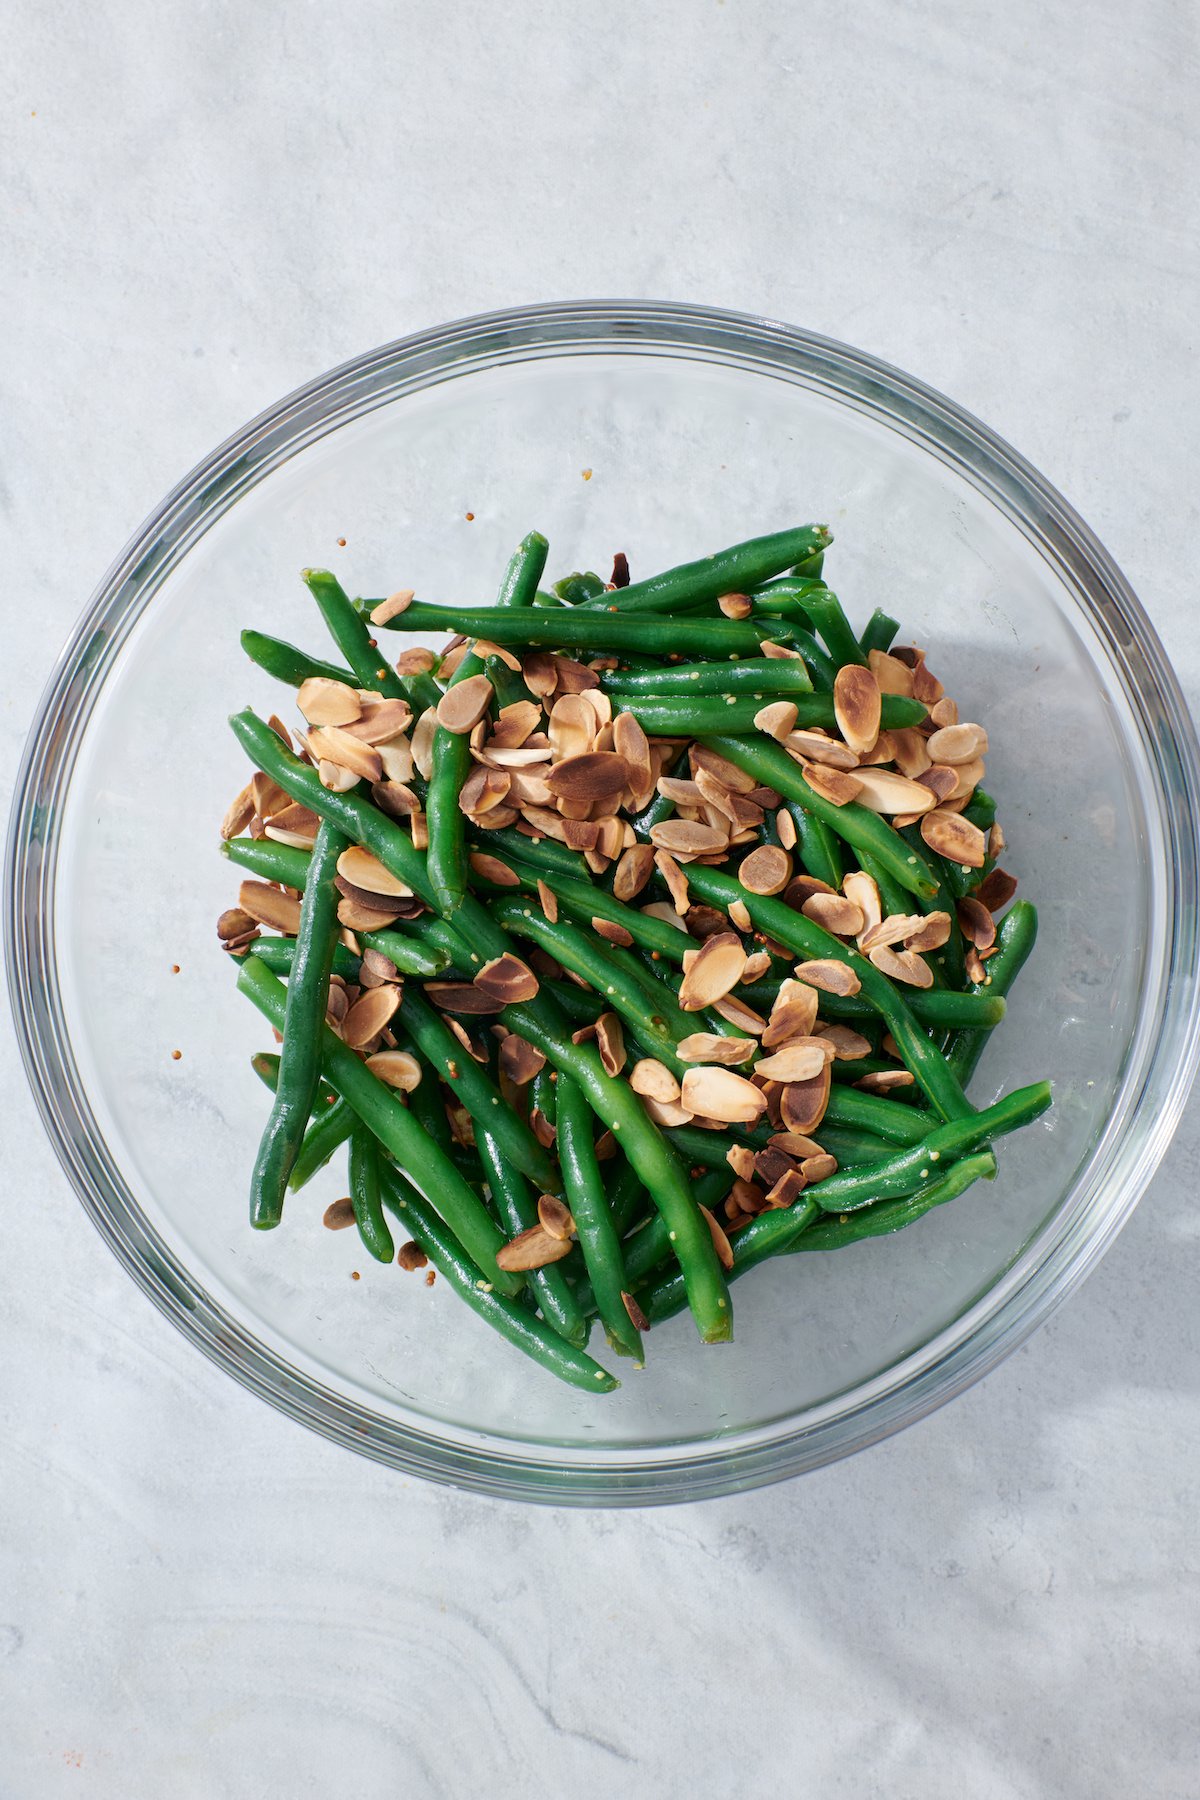 Assembled Green Bean Salad with Mustard Vinaigrette and toasted sliced almonds.